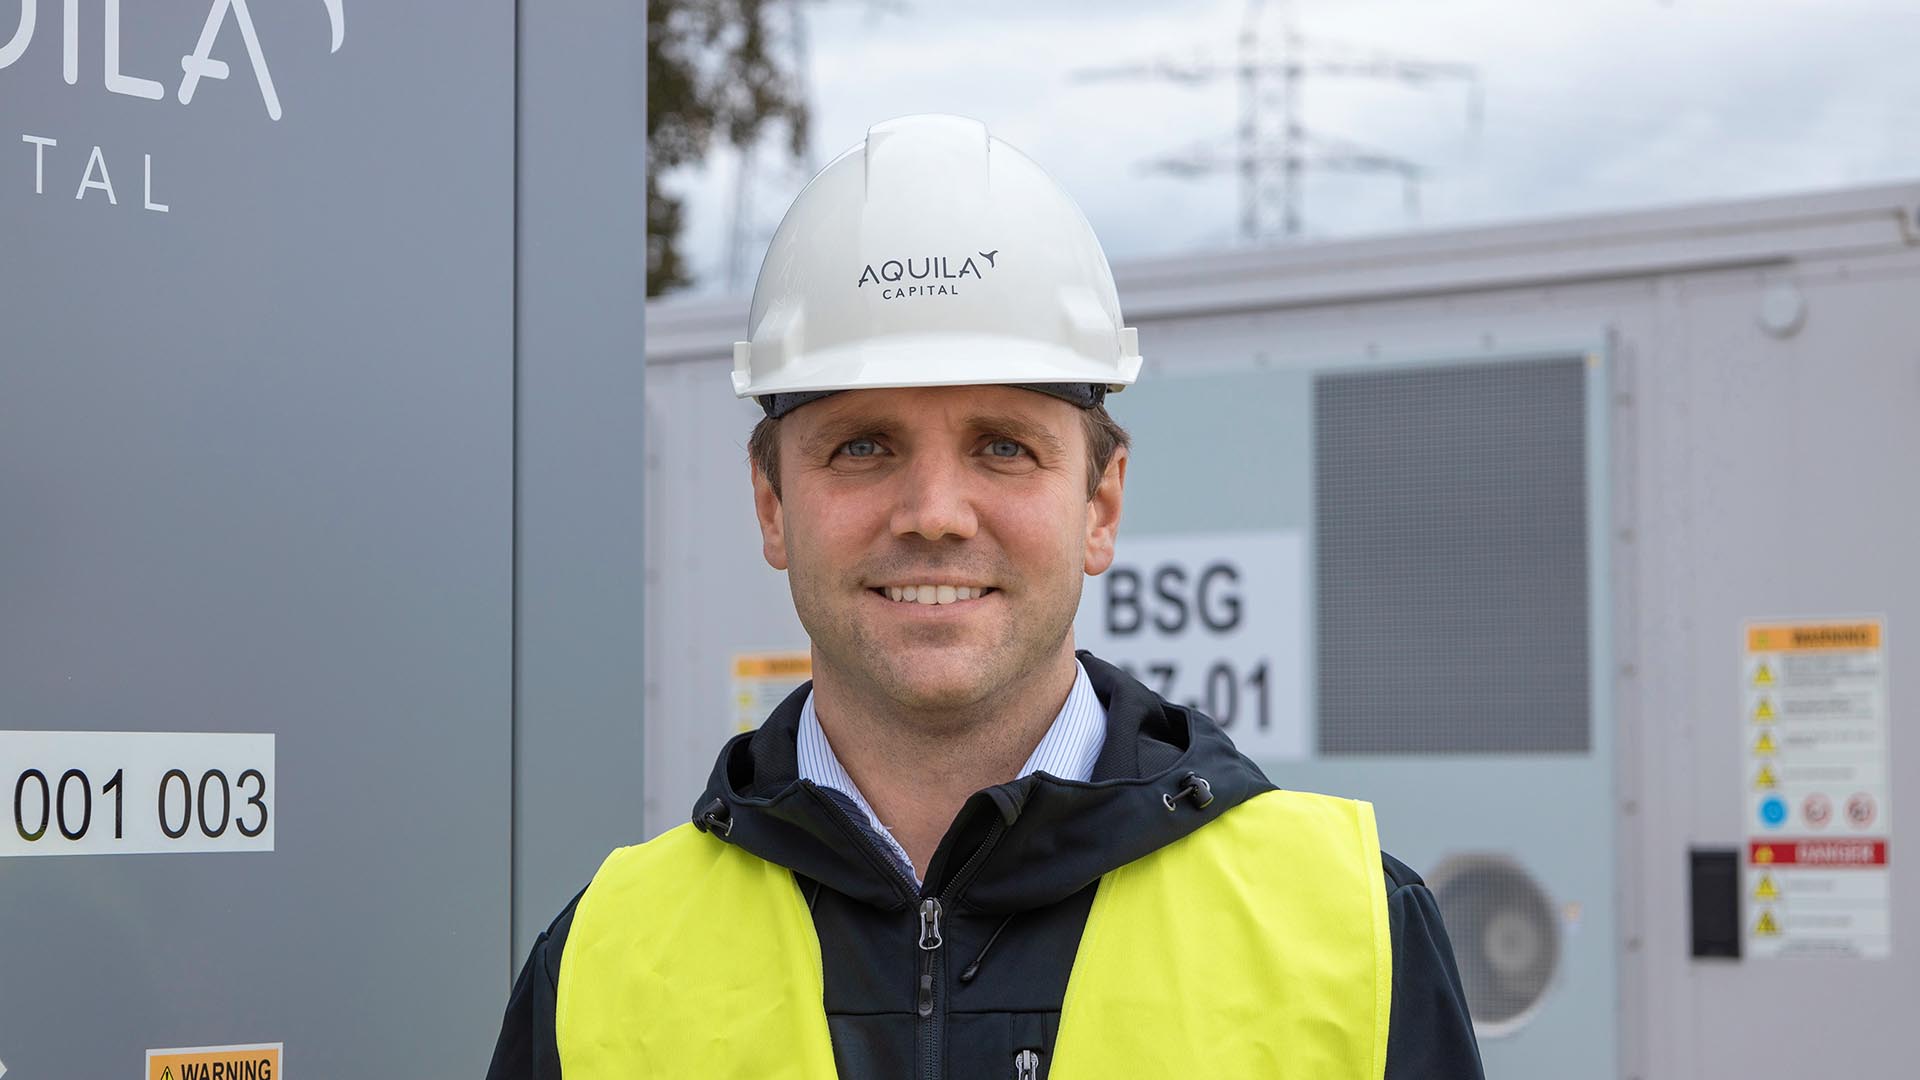 Aquila Clean Energy Crew member standing at the Kairos battery energy storage system (BESS)